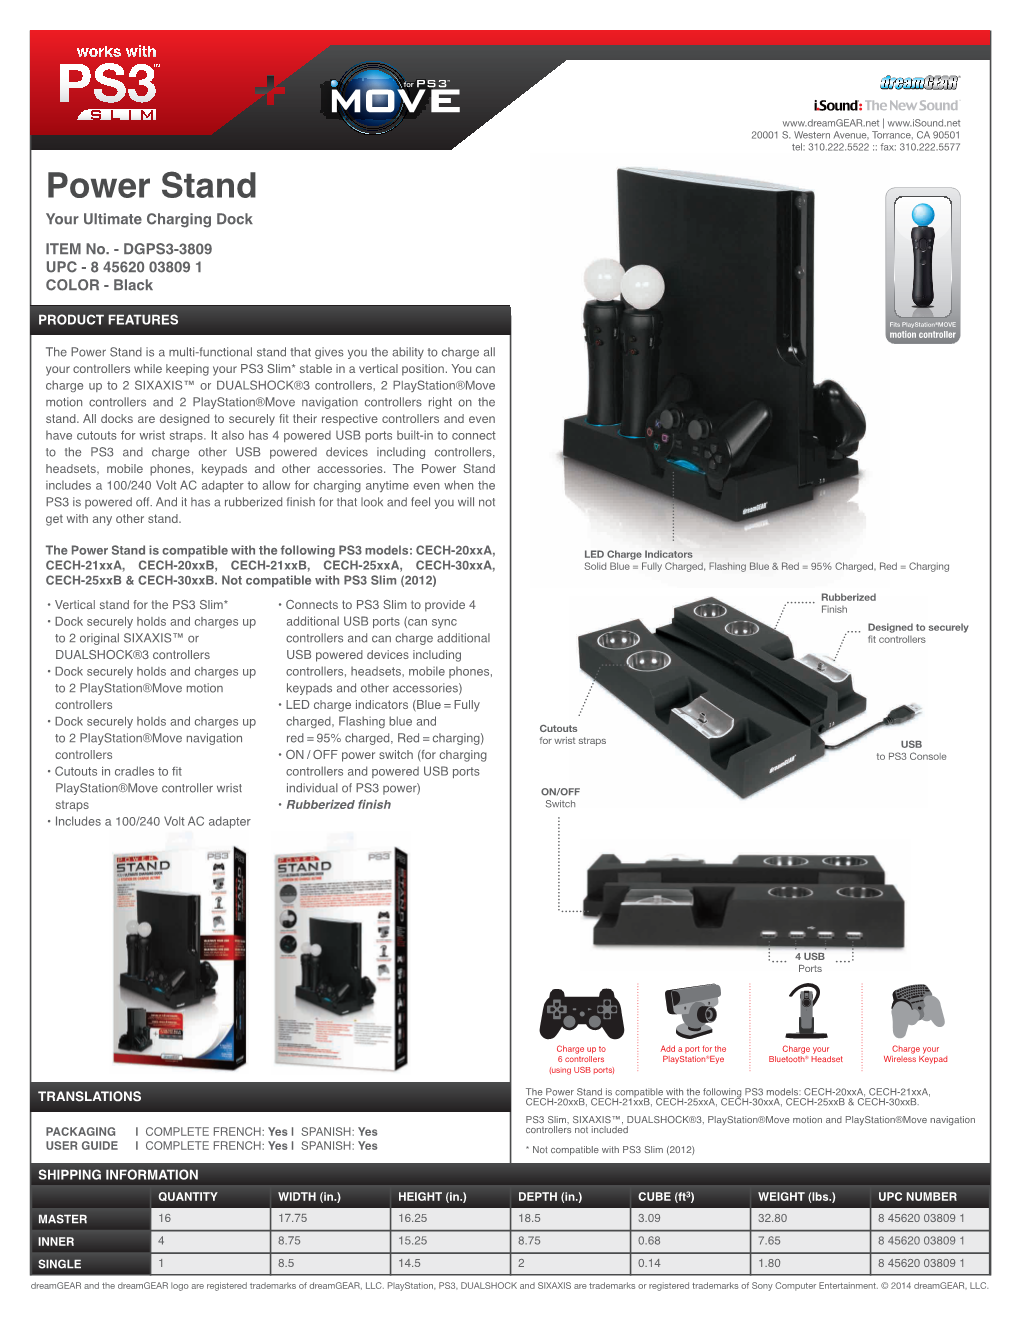 Dgps3-3809-Move Power Stand-Ss